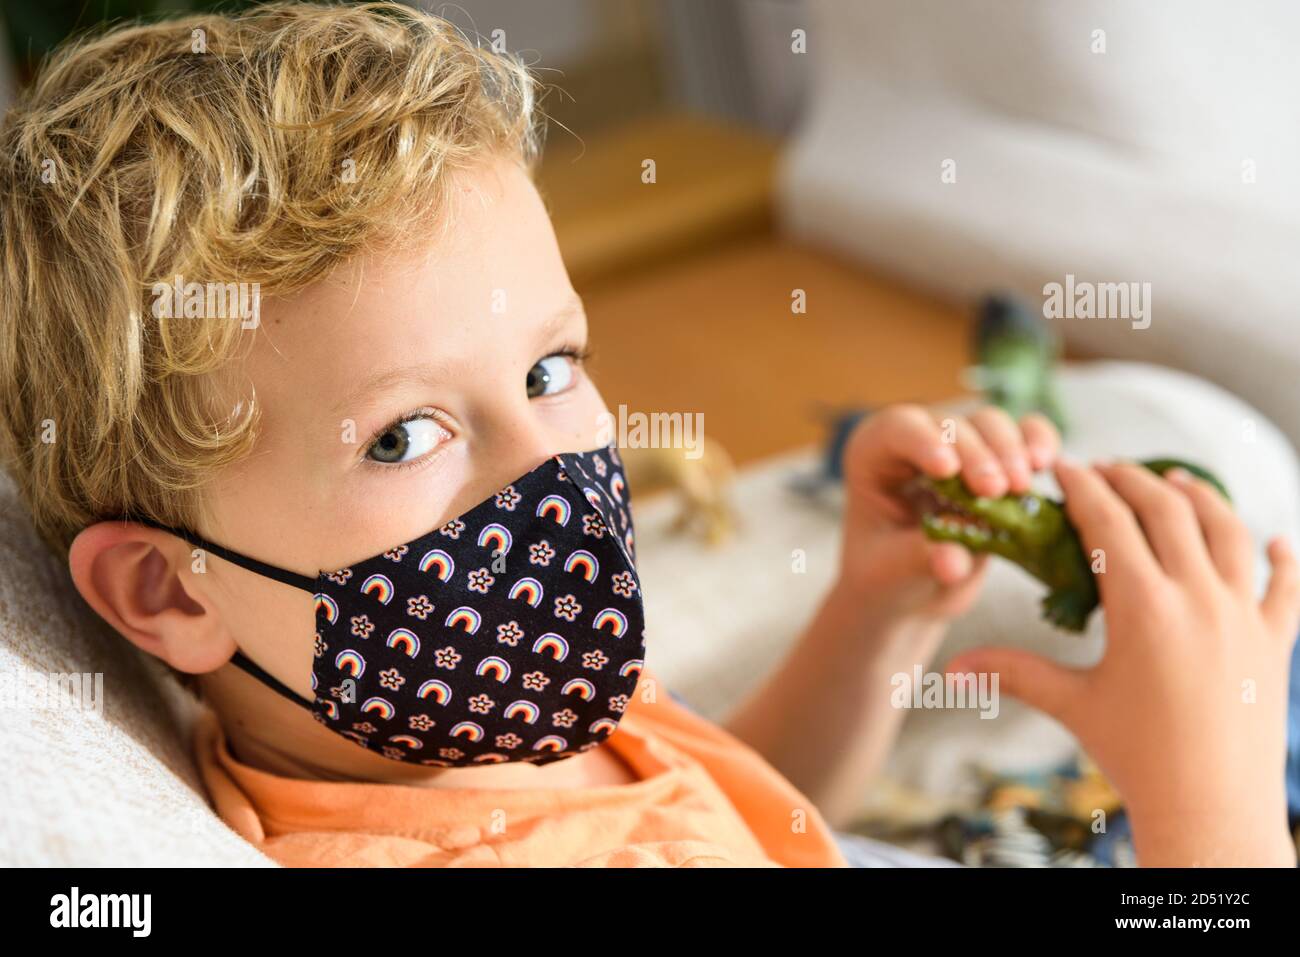 Child with mask confined at home during quarantine. Stock Photo